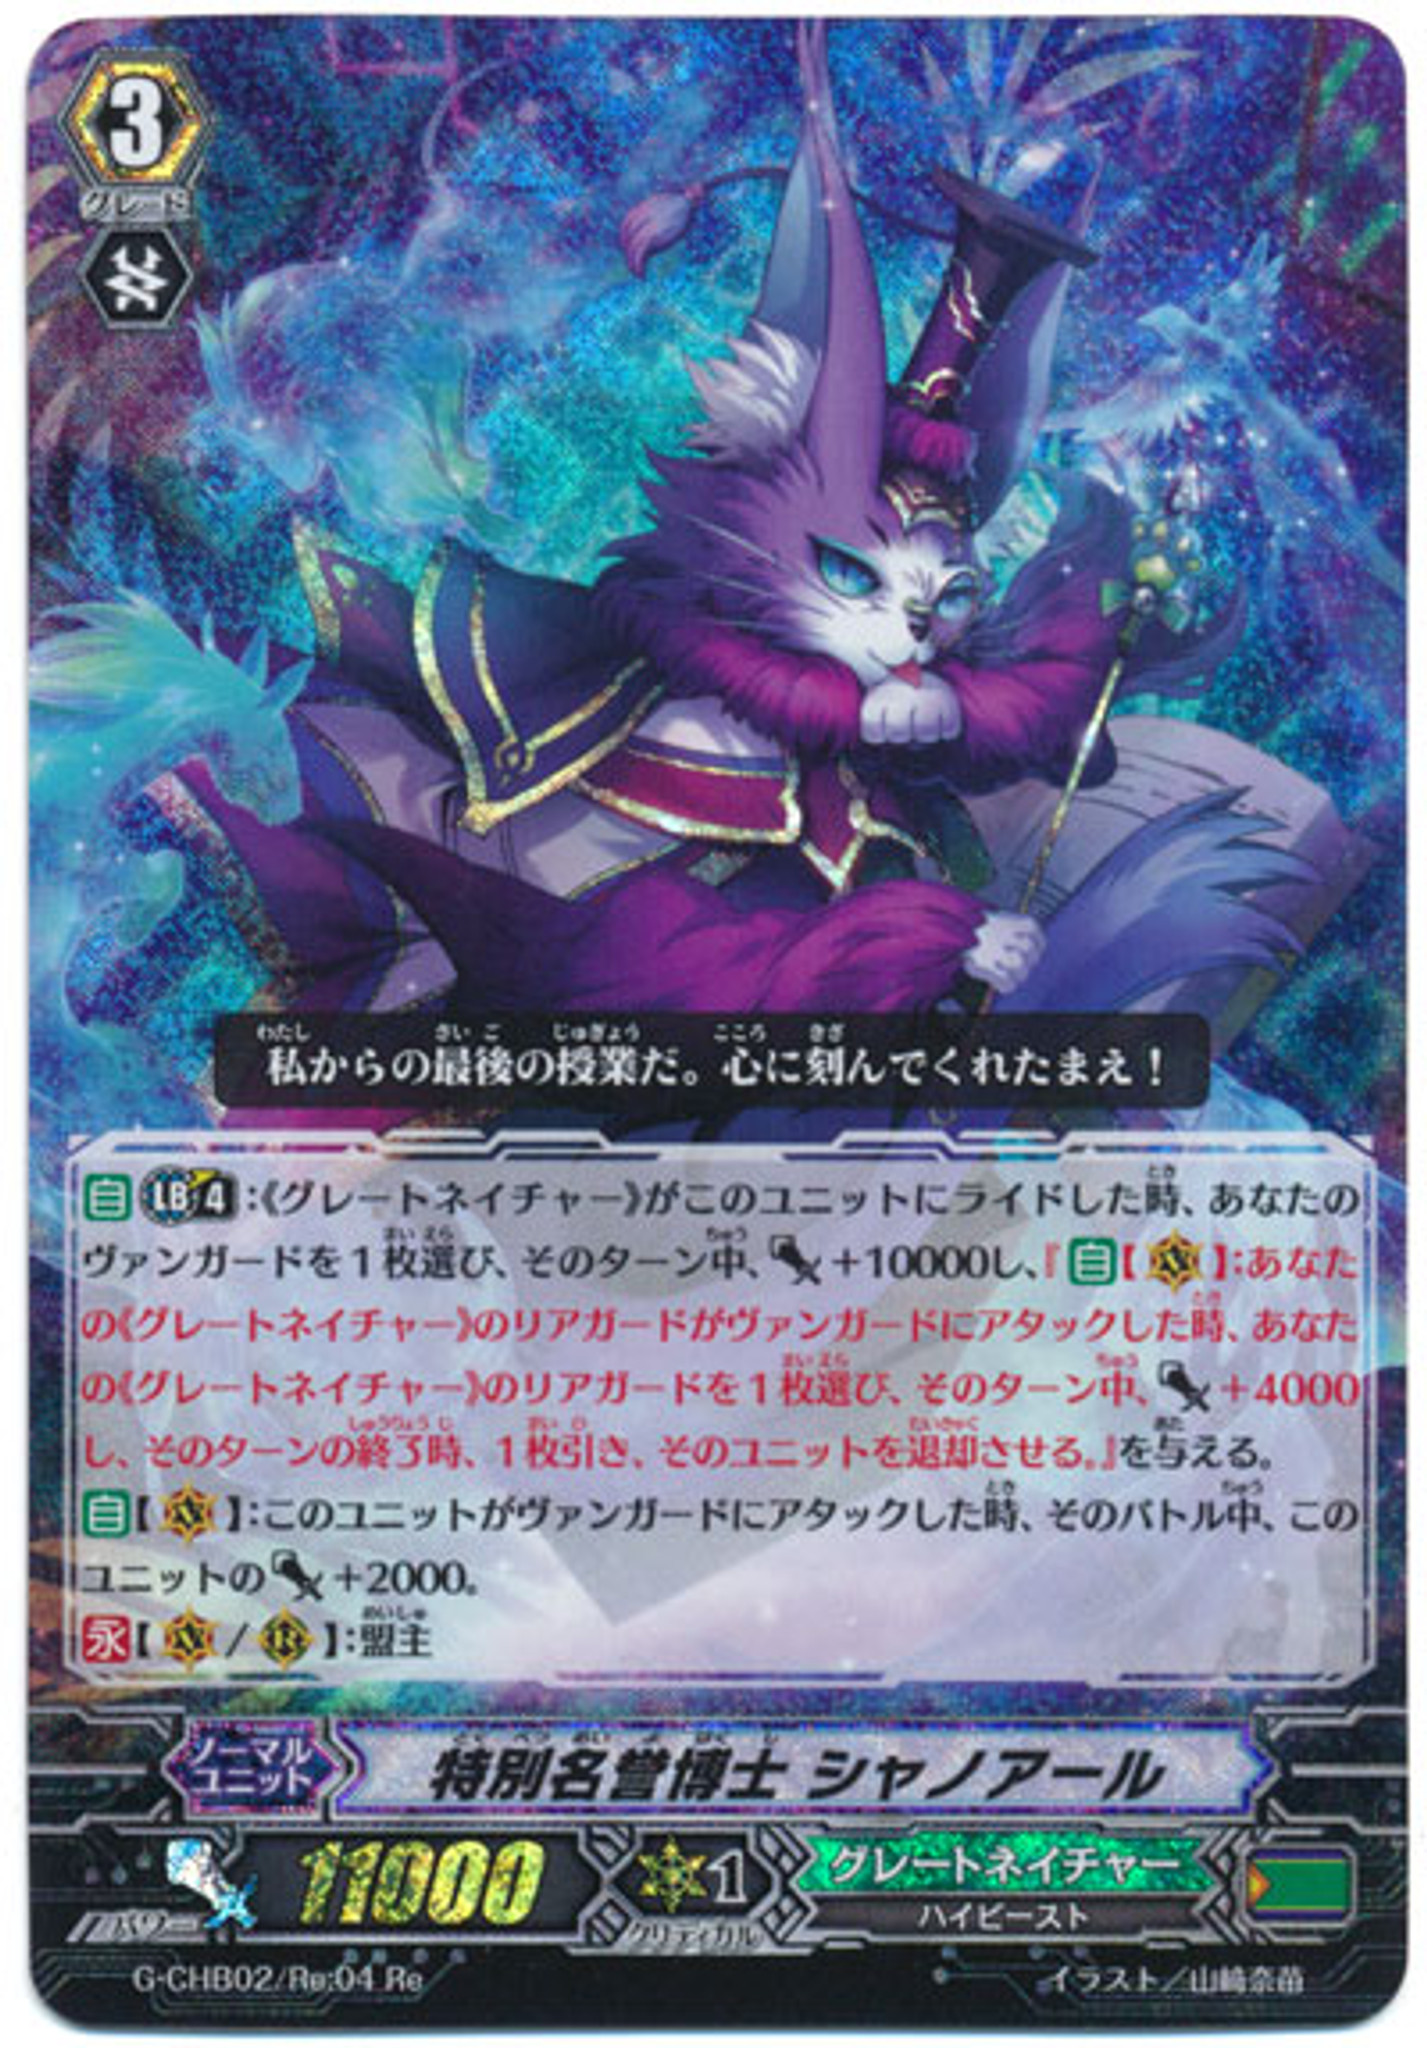 CardFight G Character Booster 2 WE ARE!!! TRINITY DRAGON Professor, Chatnoir G-CHB02/Re04